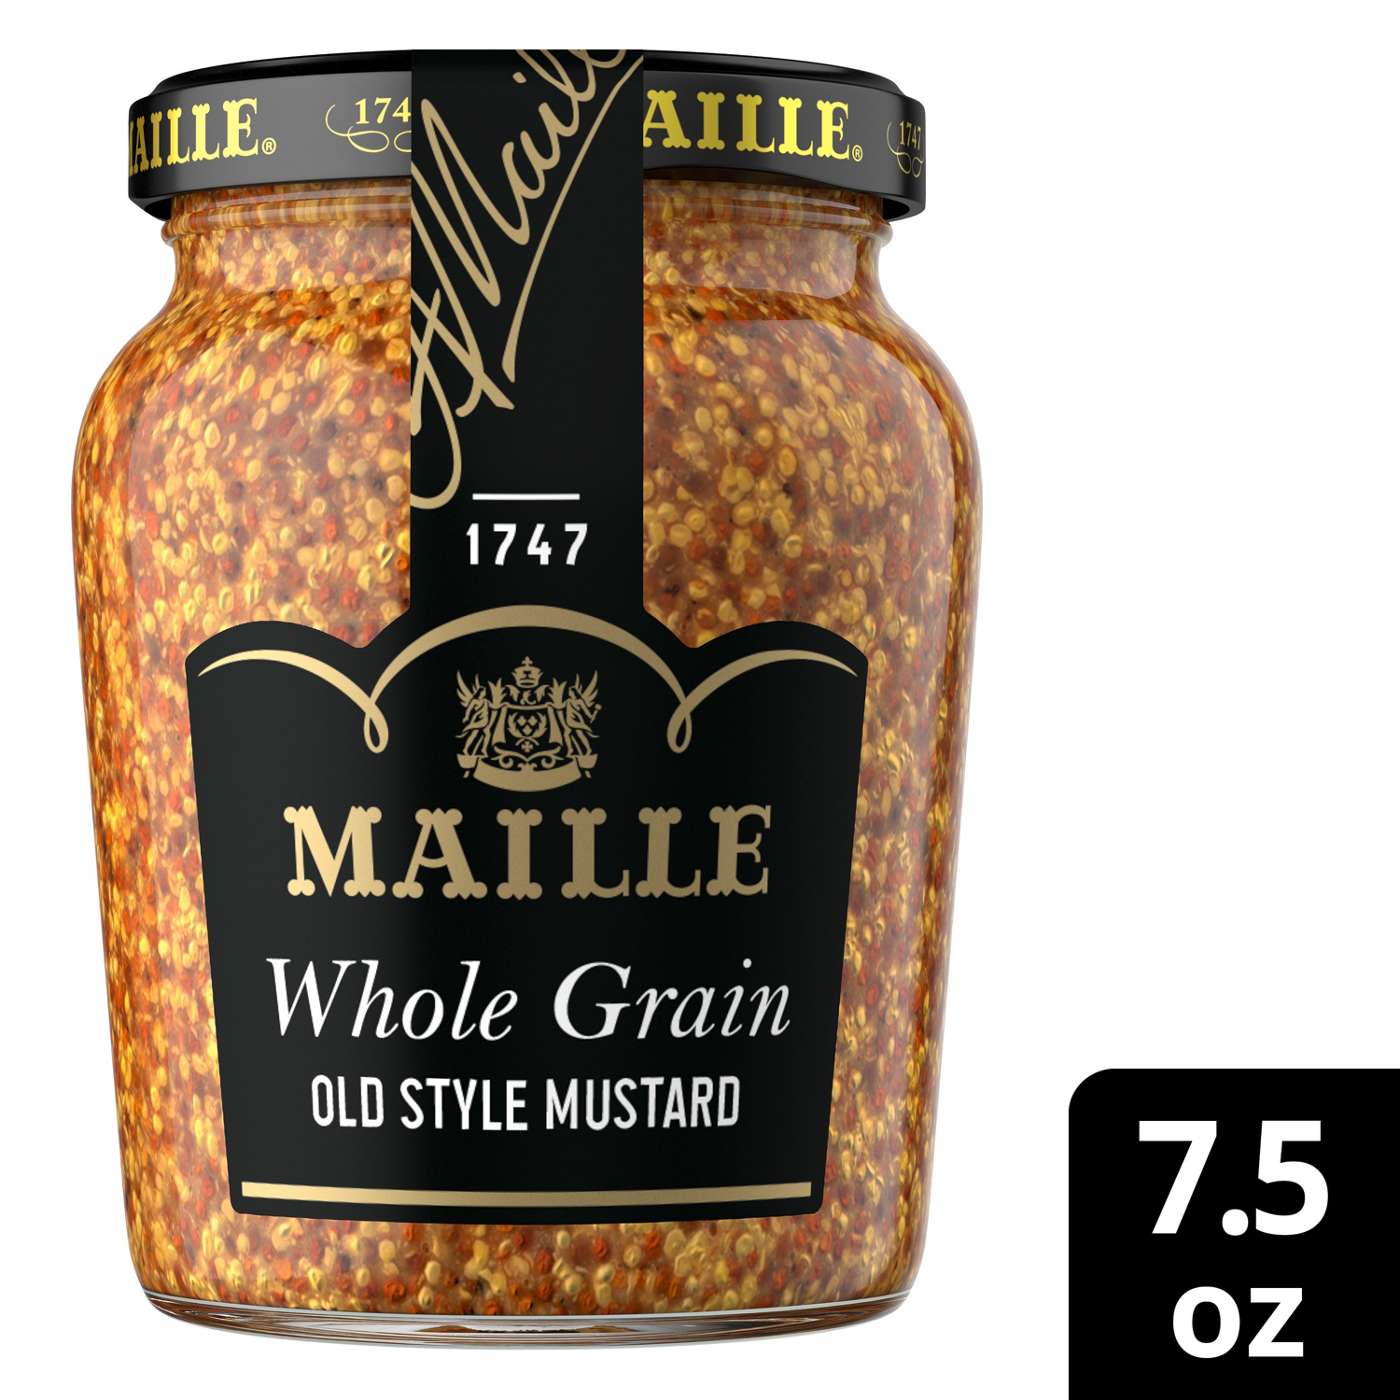 Maille Mustard Whole Grain Old Style Mustard - Shop Mustard at H-E-B